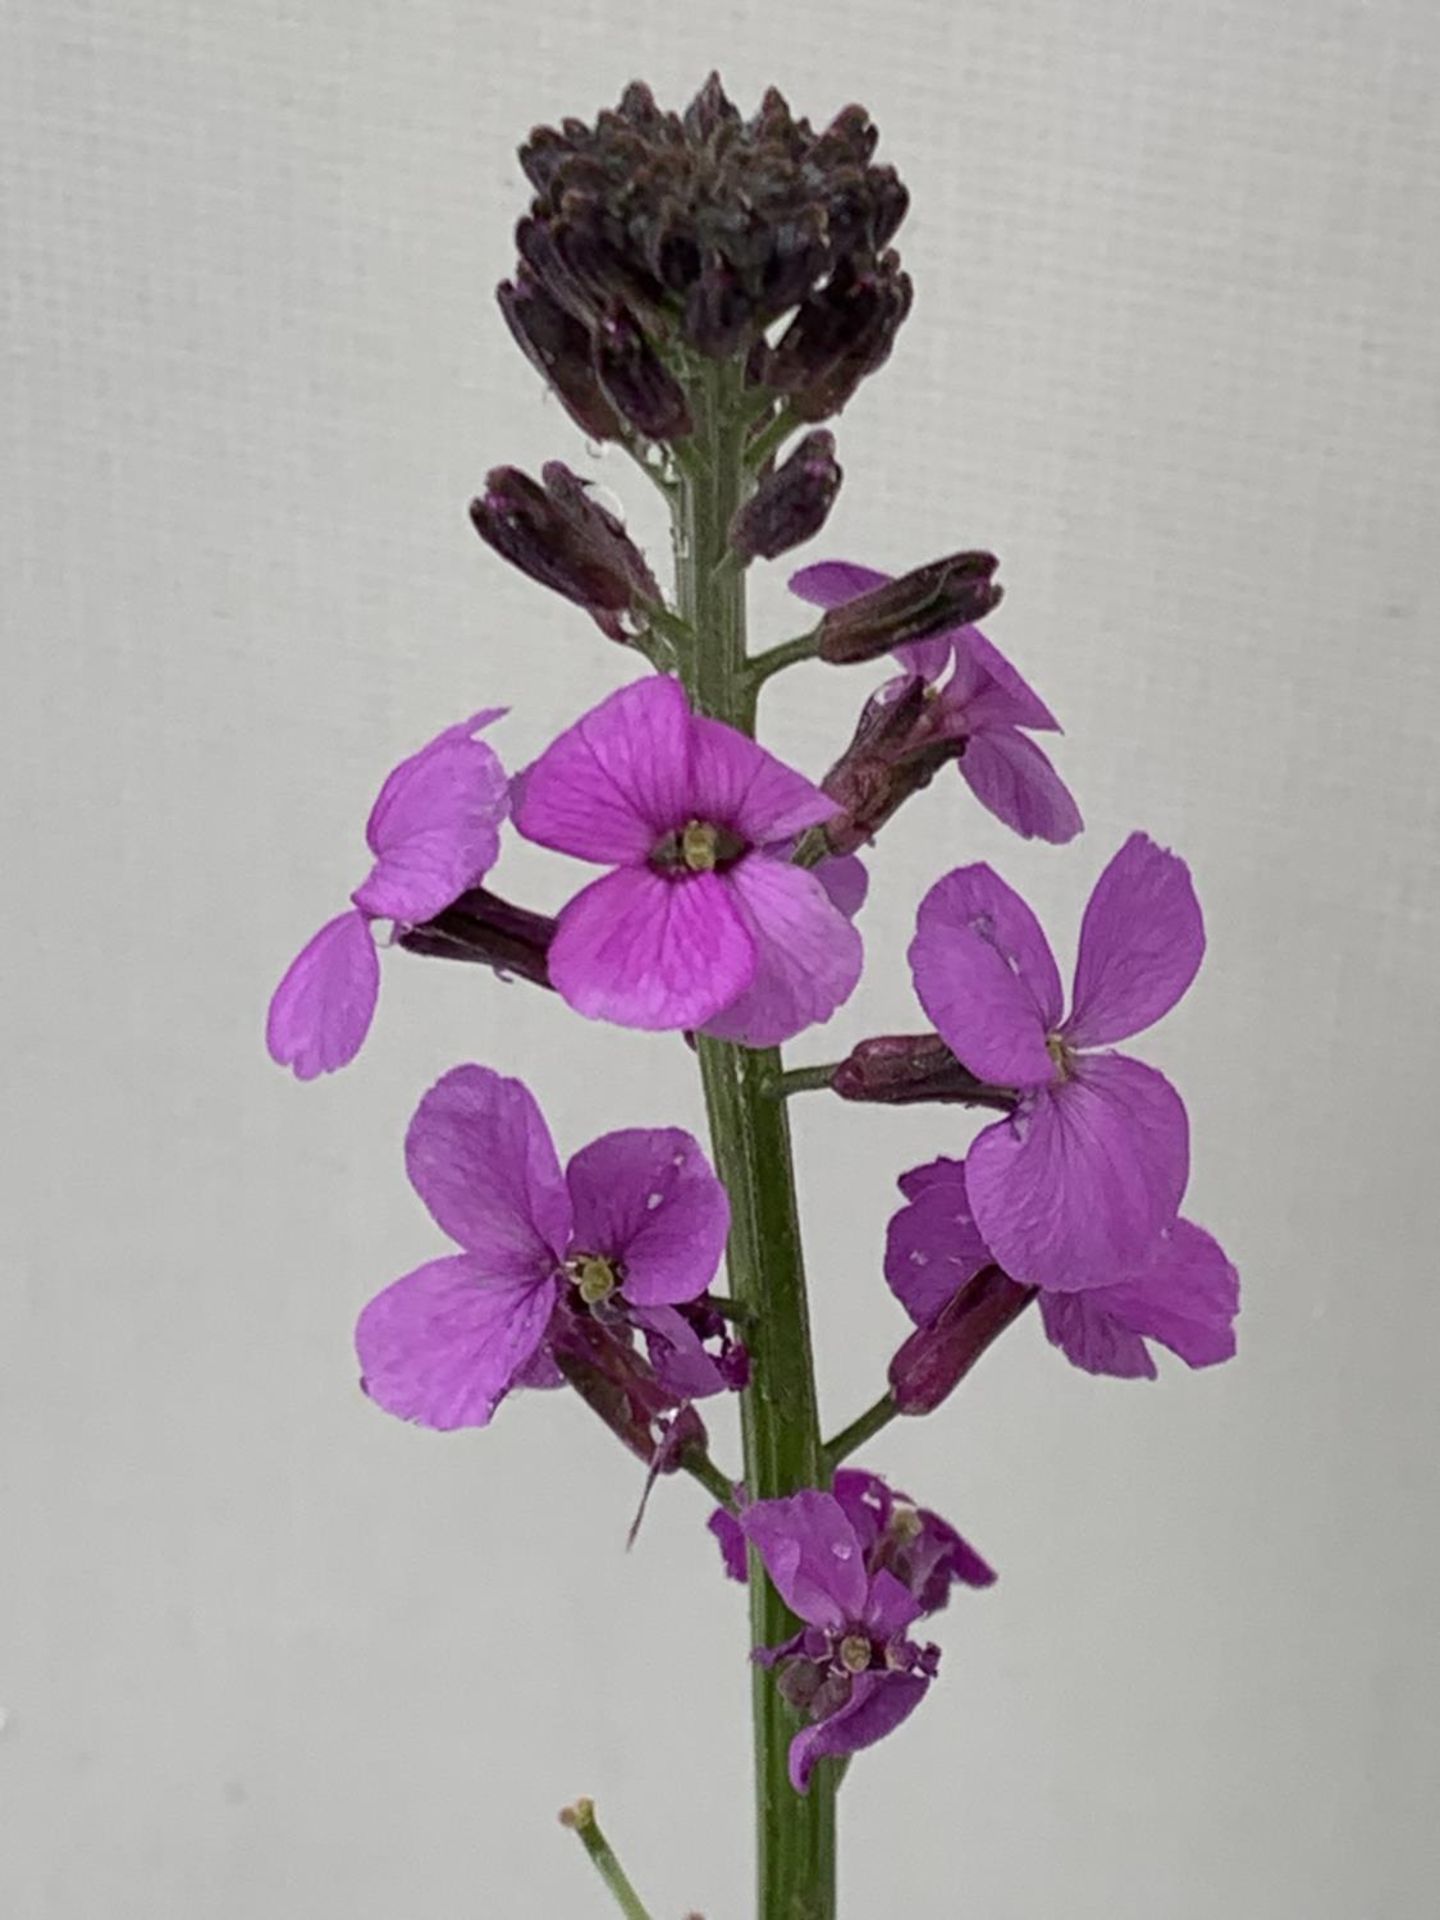 SIX ERYSIMUM BOWLES MAUVE IN 2 LTR POTS 40-50CM TALL TO BE SOLD FOR THE SIX PLUS VAT - Image 3 of 5